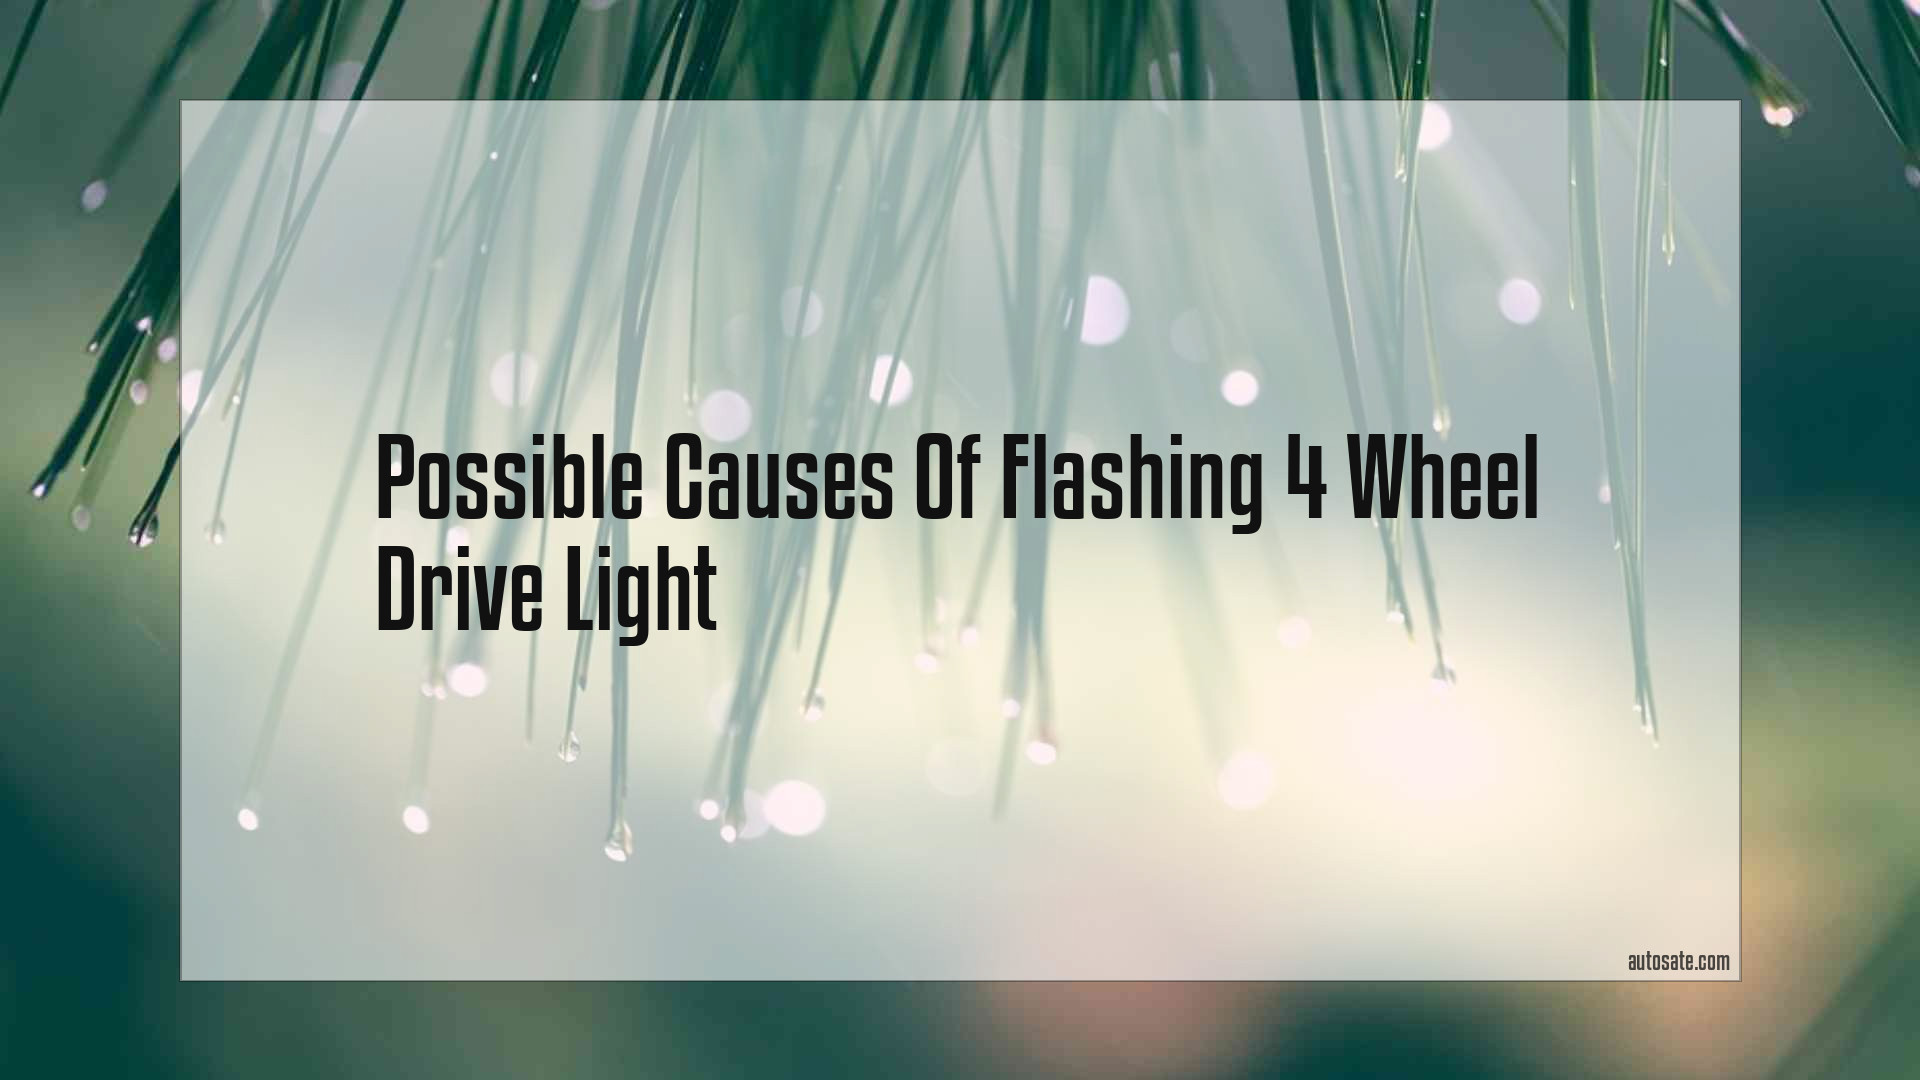 Possible Causes Of Flashing 4 Wheel Drive Light